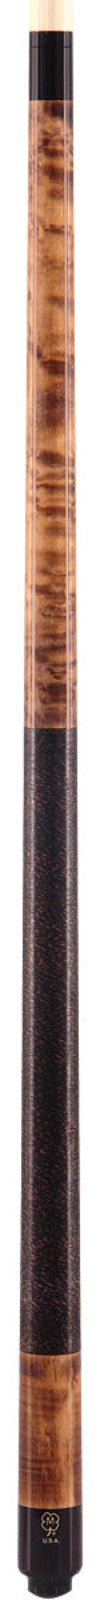 McDermott McDermott GS07 Pool Cue - G-Core Special Promotion Pool Cue